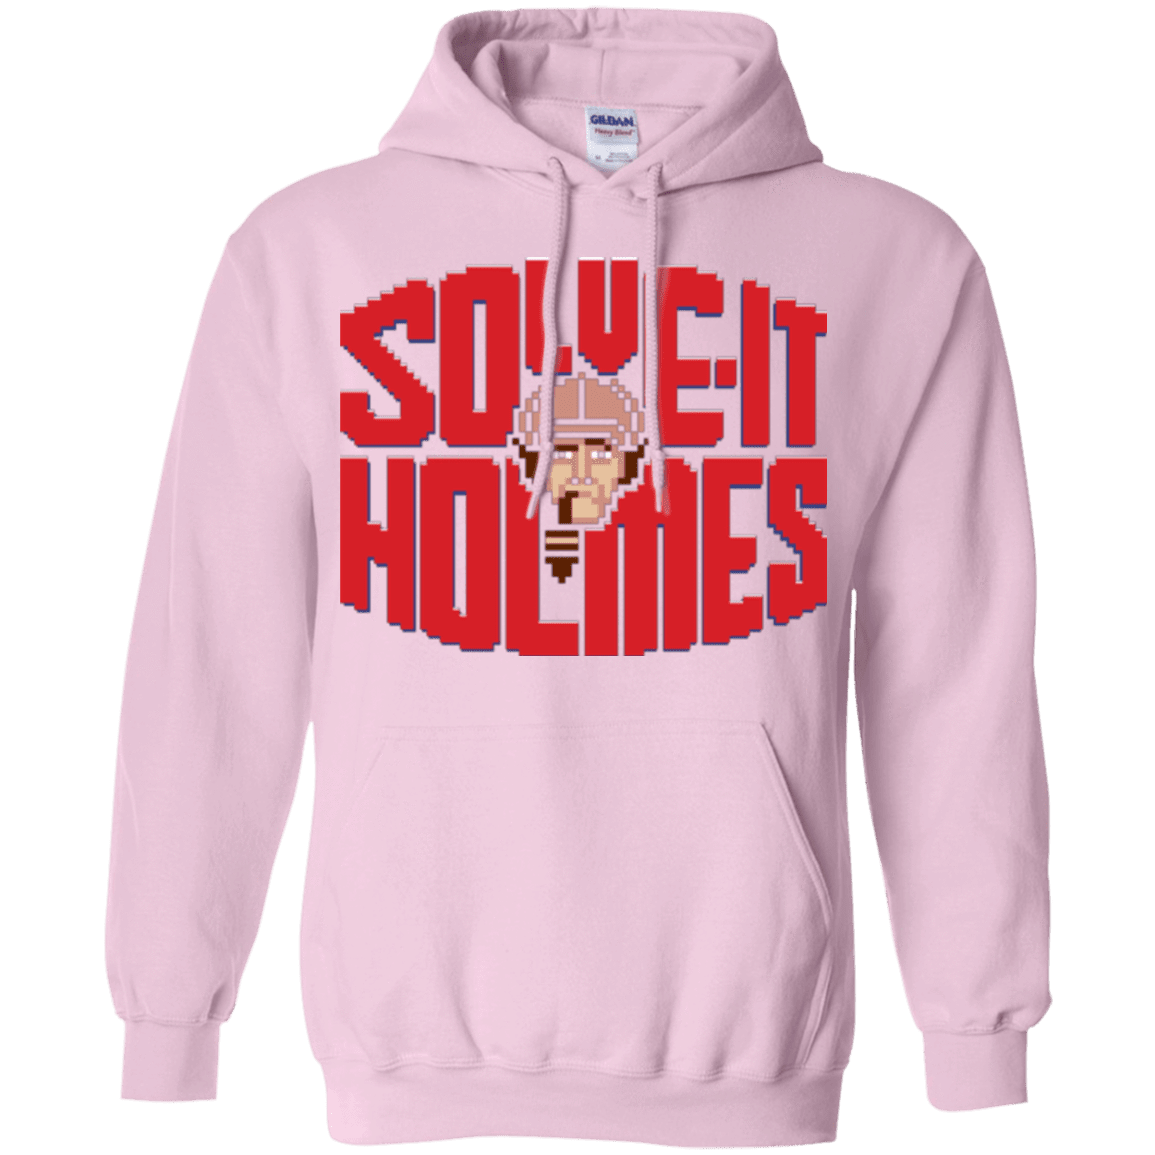 Sweatshirts Light Pink / Small Solve It Holmes Pullover Hoodie